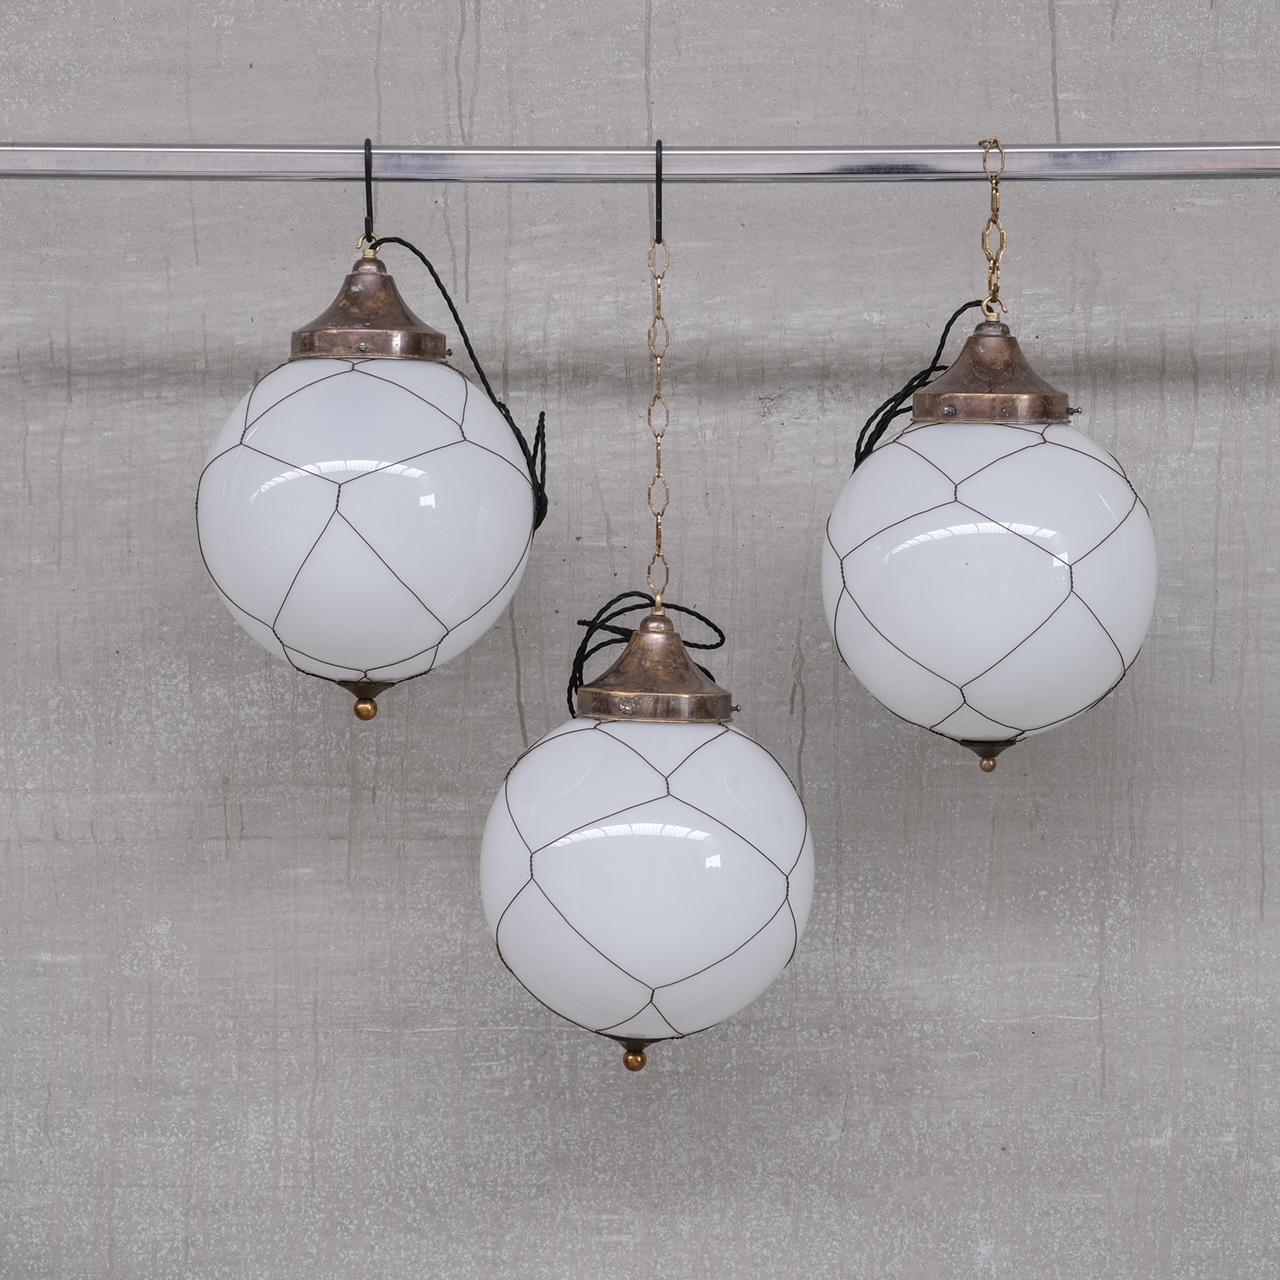 Opaline and brass caged glass pendant lights.

Holland, circa 1950s.

Natural patina to the metal.

PRICED AND SOLD INDIVIDUALLY.

3 available at the time of listing. Please check for updated stock amounts.

Re-wired and PAT